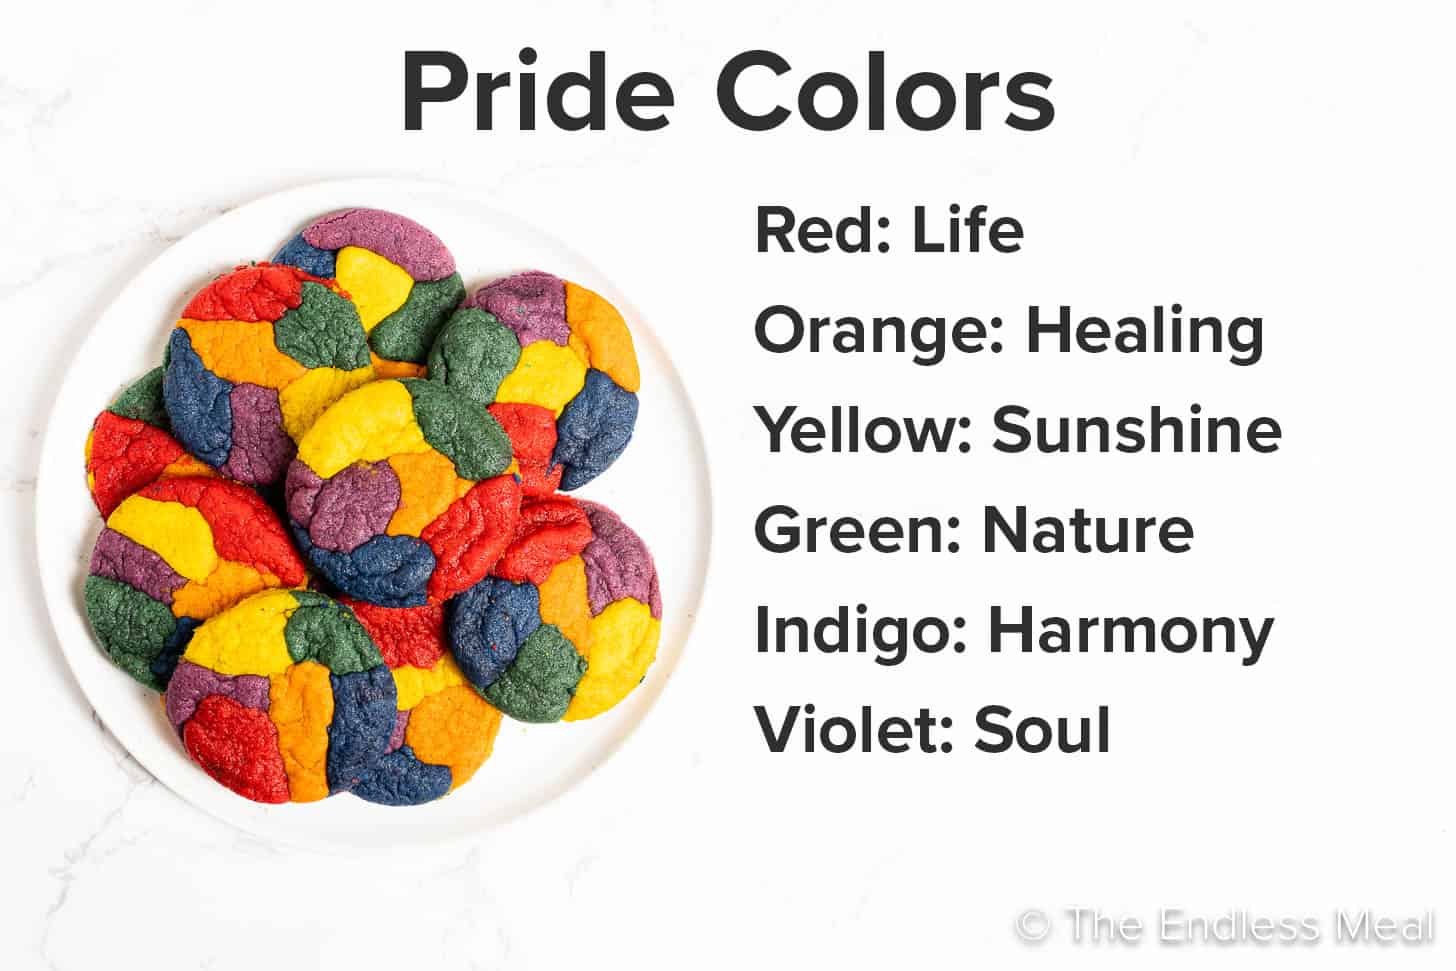 A picture showing what the colors in the Pride flag mean beside a plate of rainbow cookies